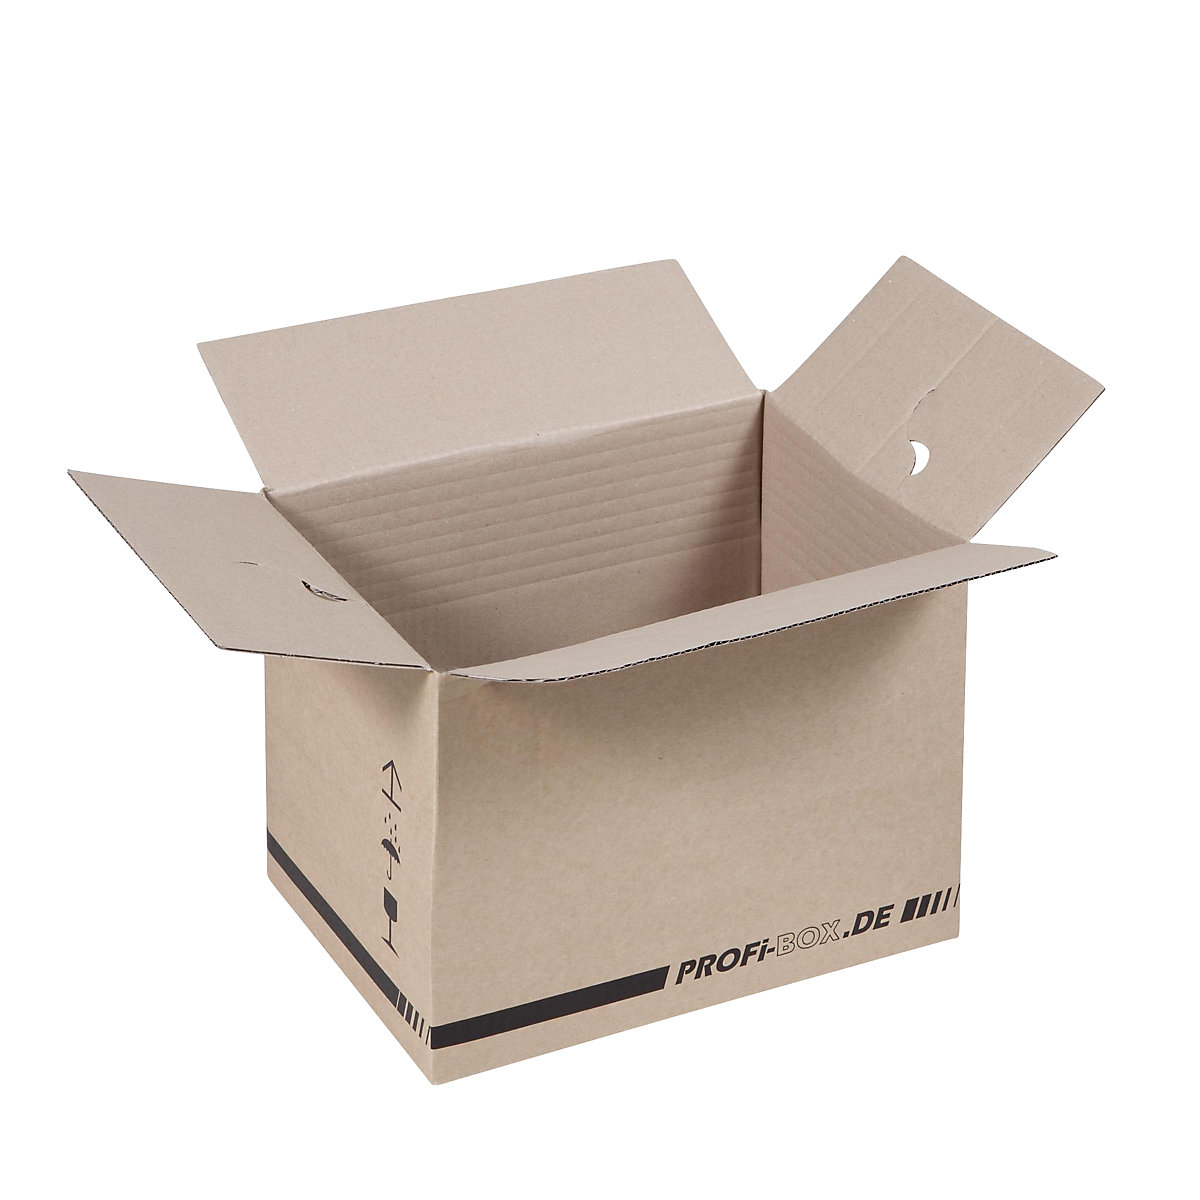 Professional boxes, made of single fluted cardboard, FEFCO 0701, internal dimensions 305 x 215 x 220 mm, pack of 50-4